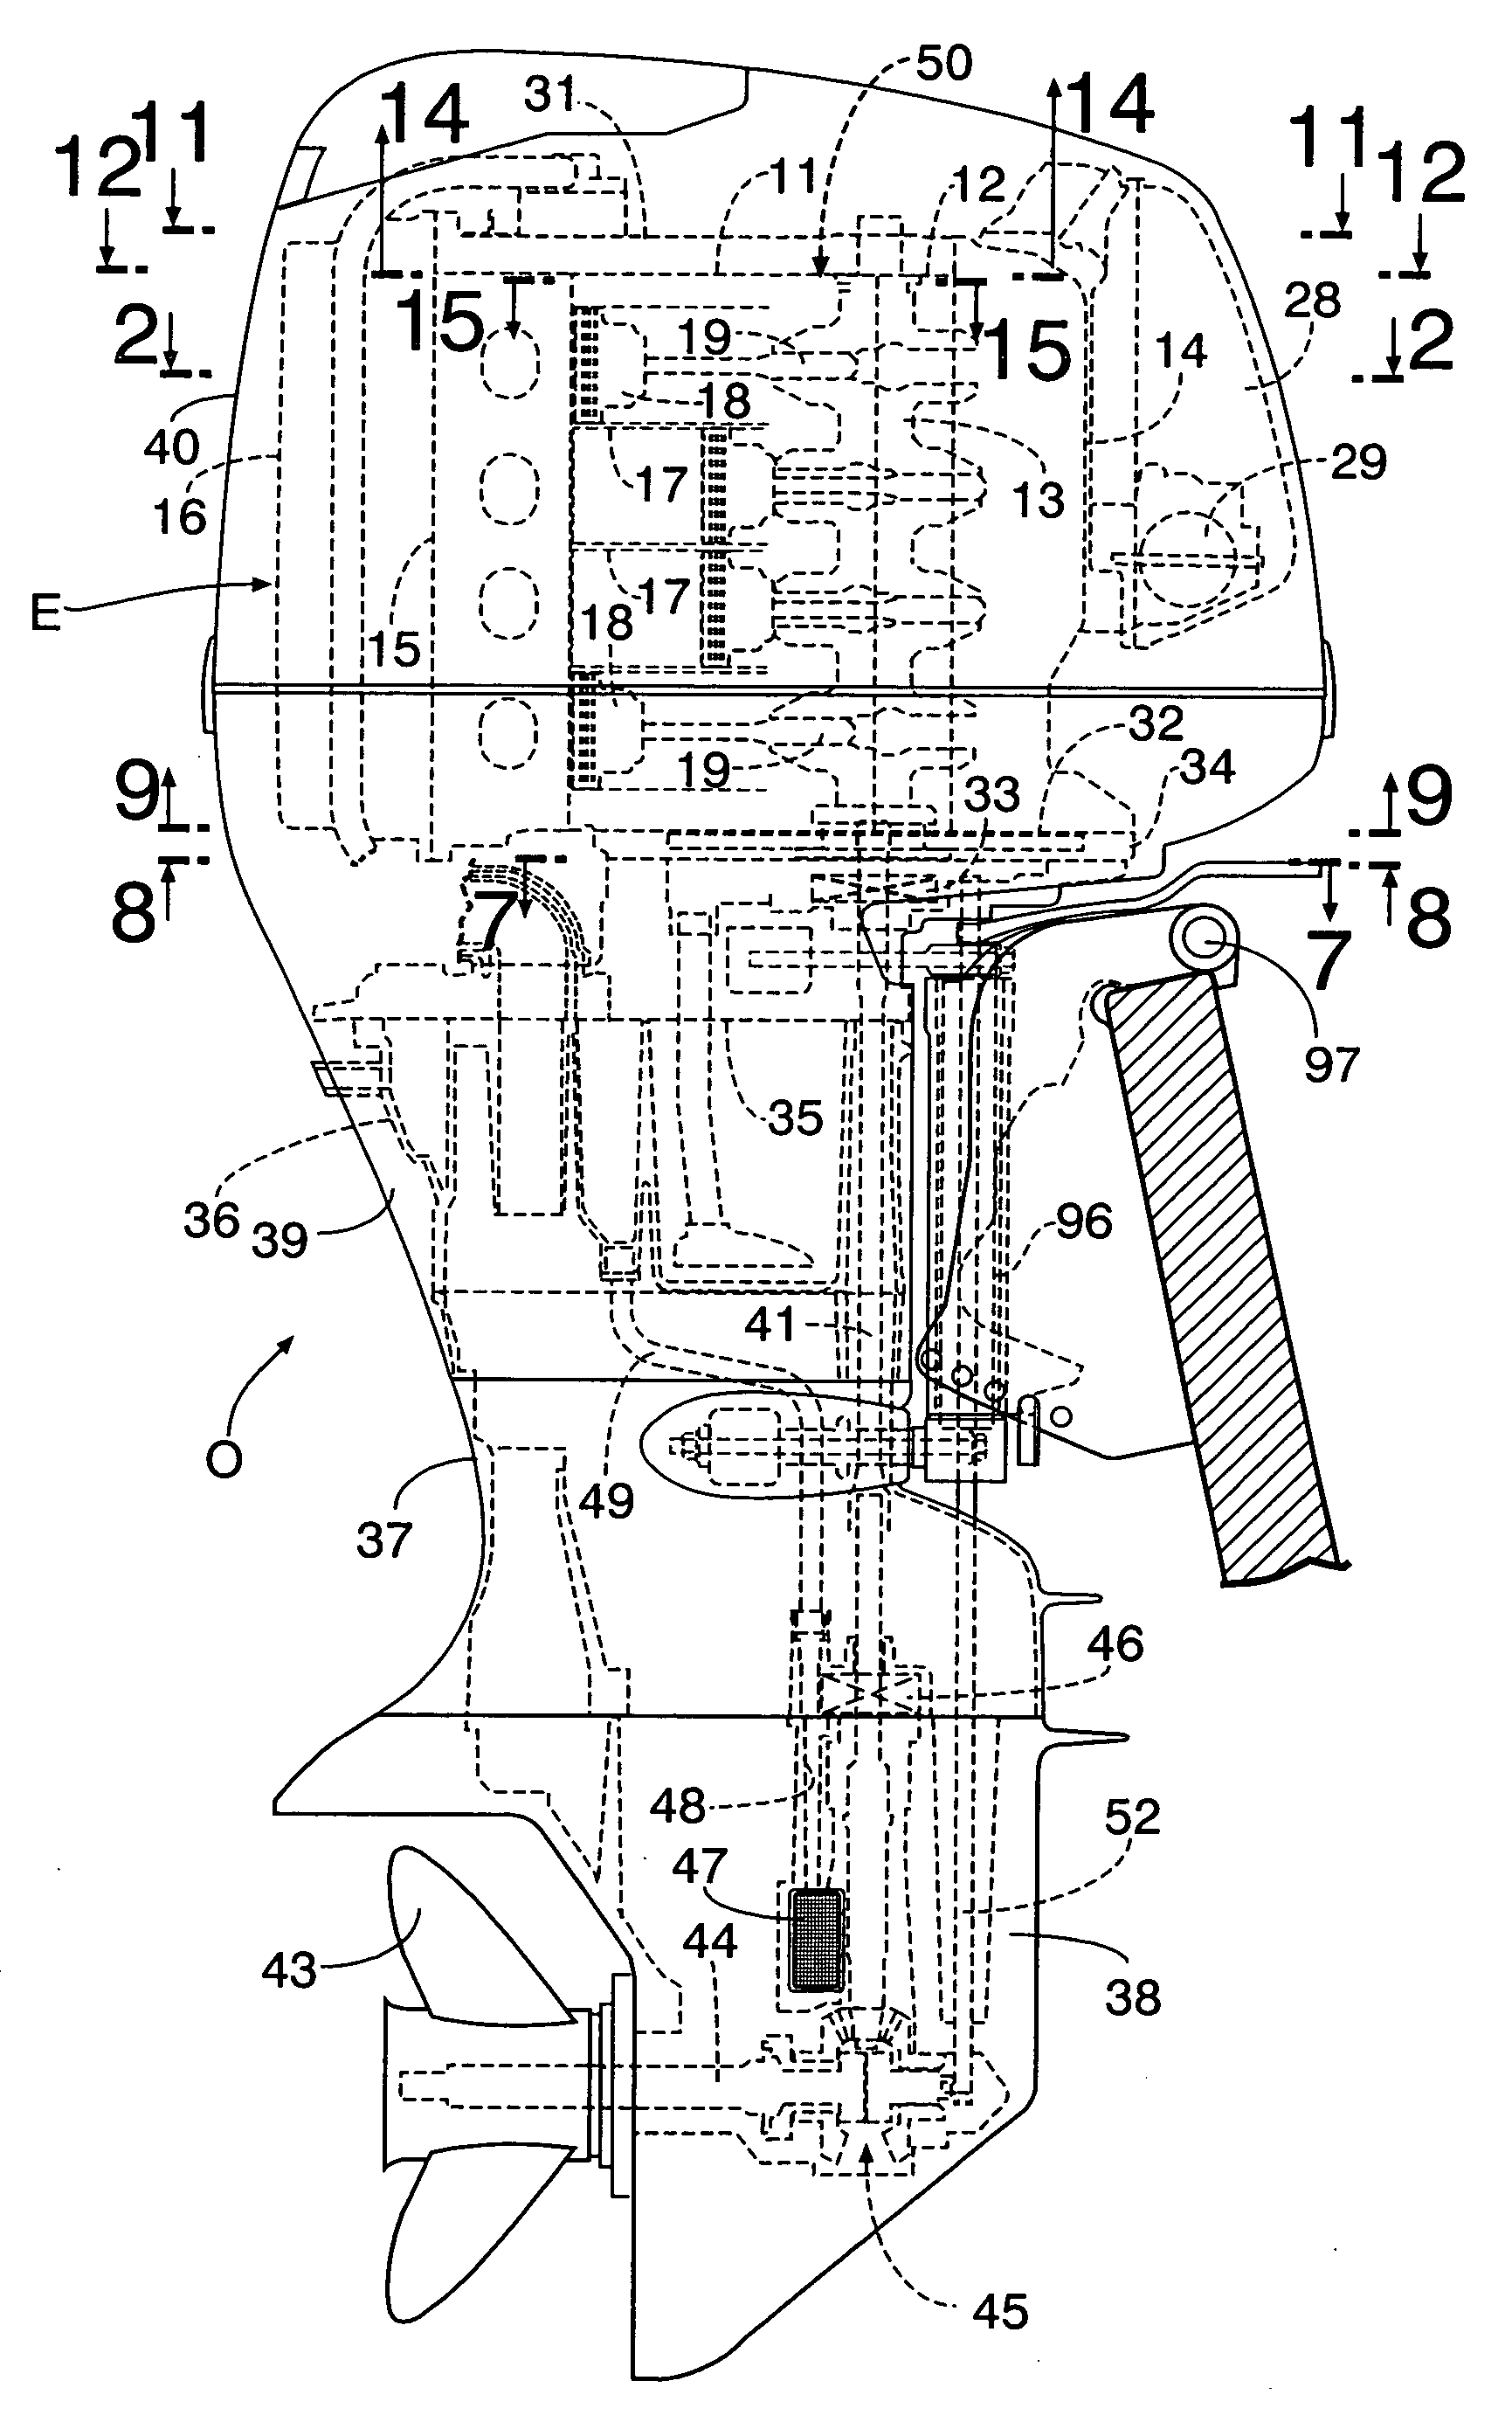 Vertical engine and outboard engine system